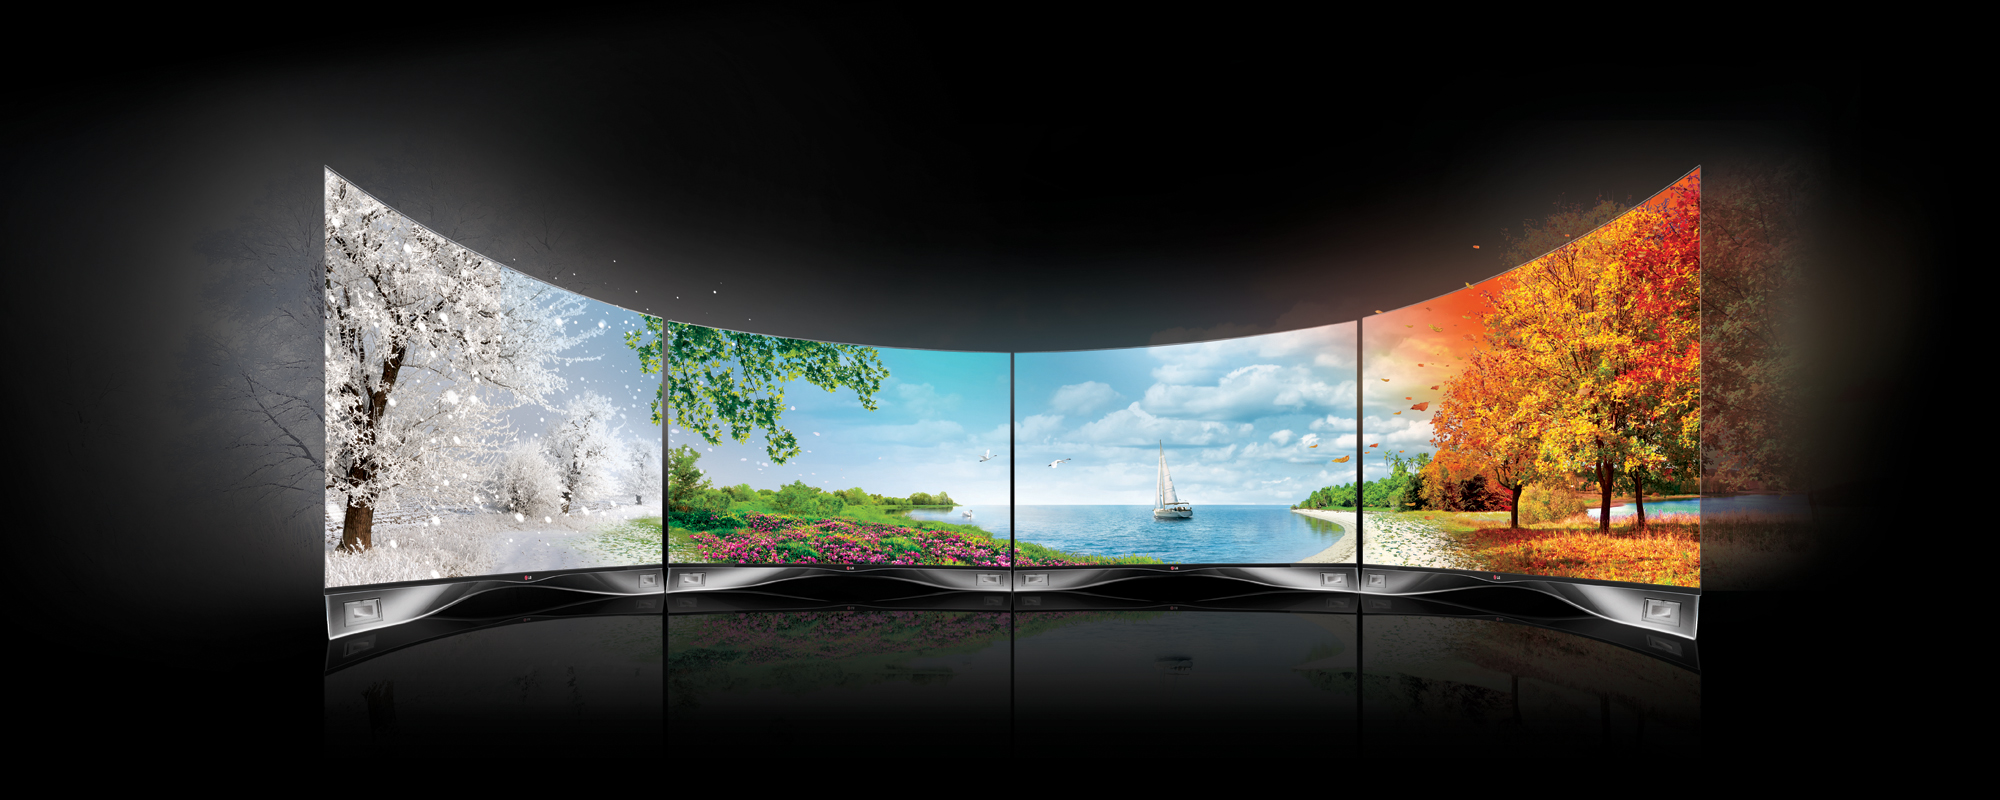 Download In Original Resolution - Curved Tv , HD Wallpaper & Backgrounds